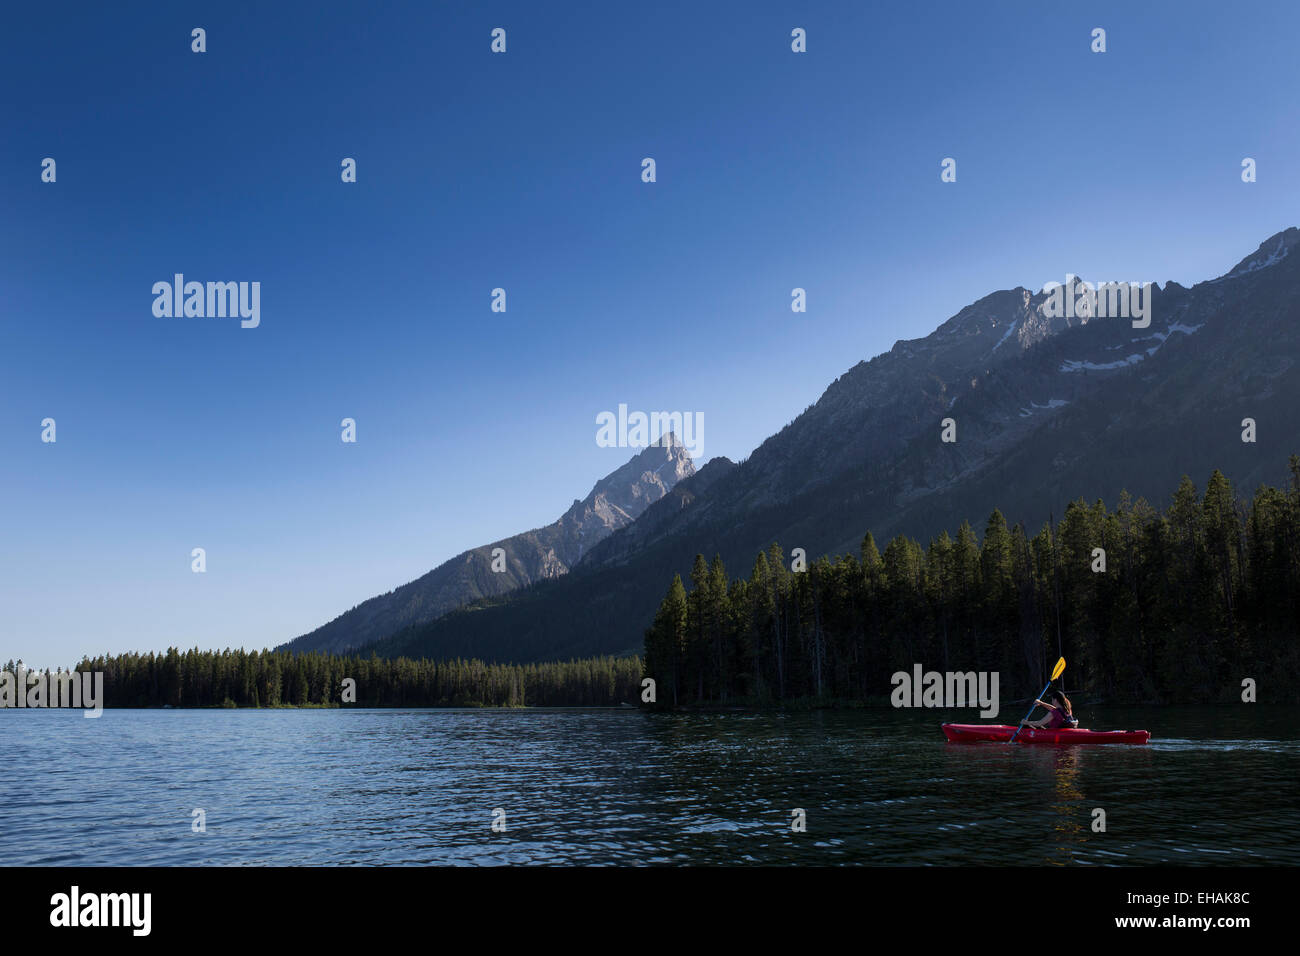 A woman kayaking in Leigh Lake in Grand Teton National Park, Wyoming, with the Teton Range in the background. Stock Photo